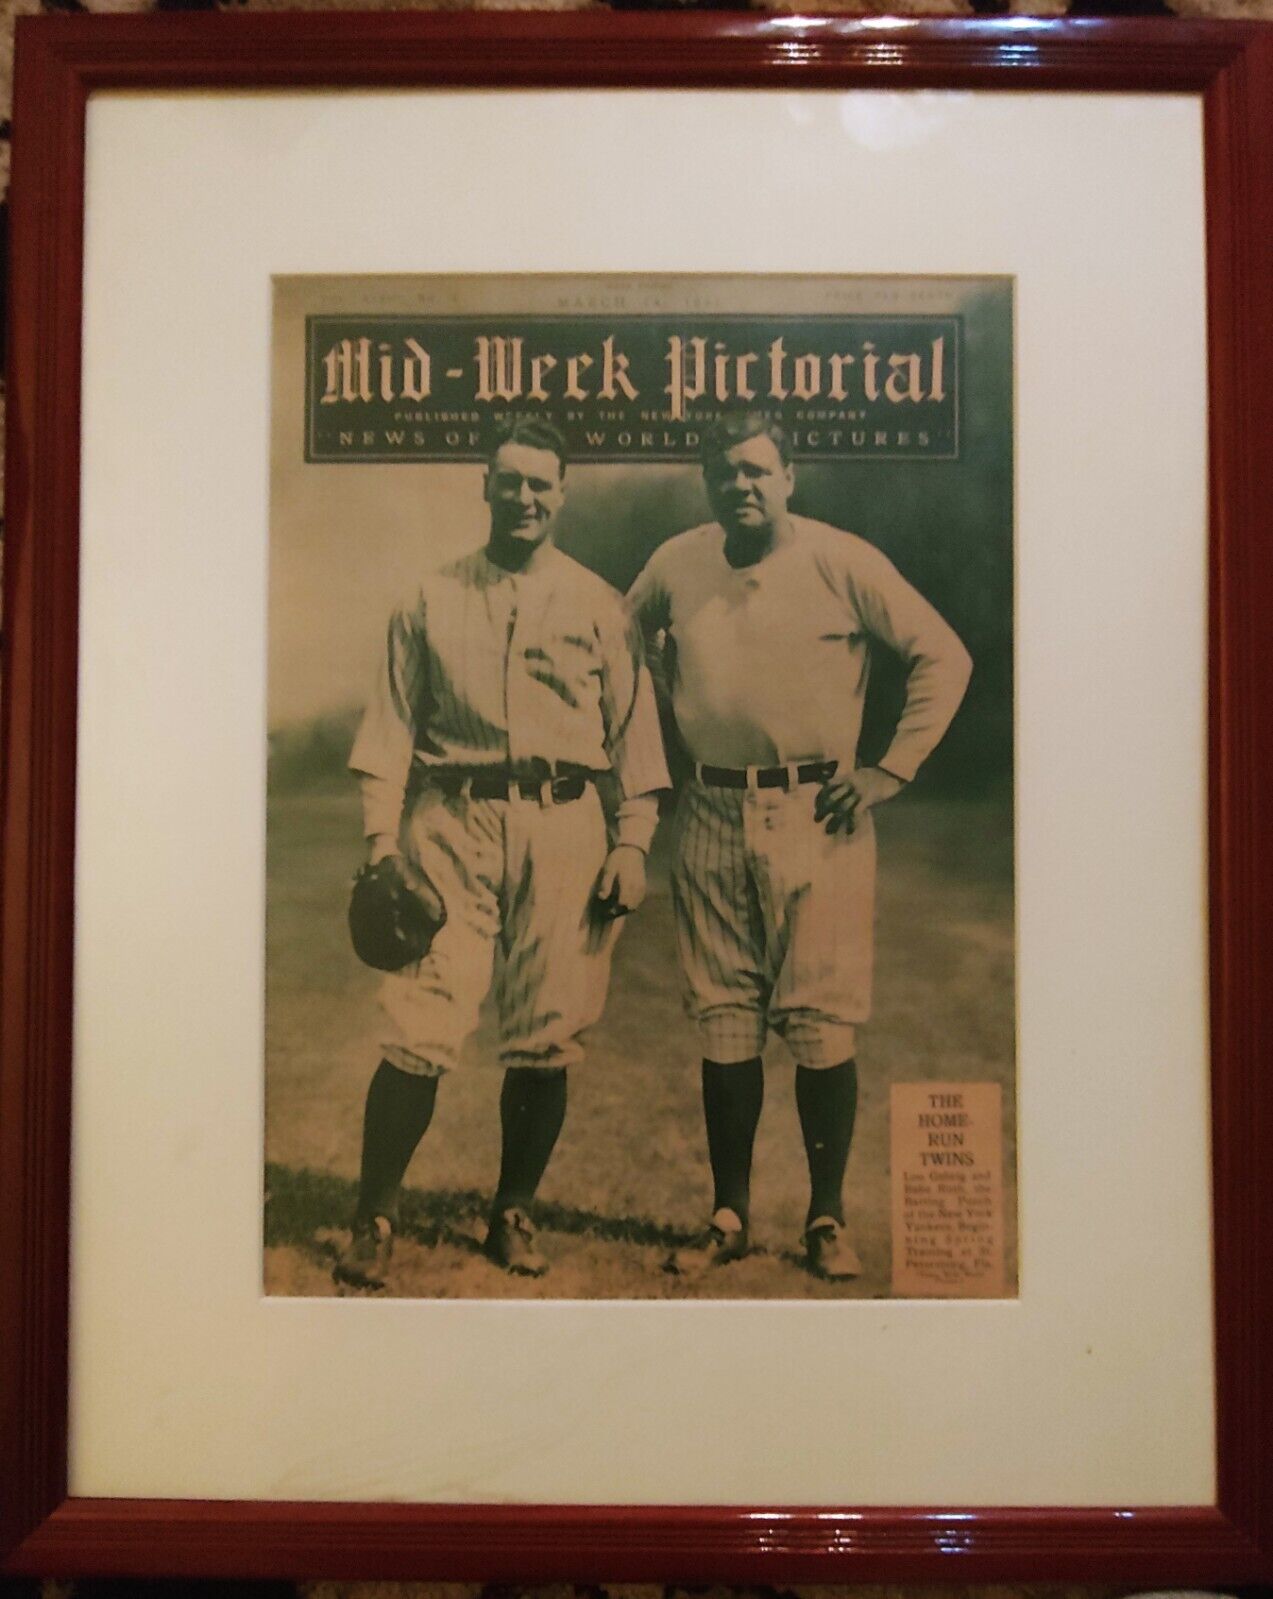 Mid-Week Pictorial (MARCH 14, 1931)~ Babe Ruth, Lou Gehrig